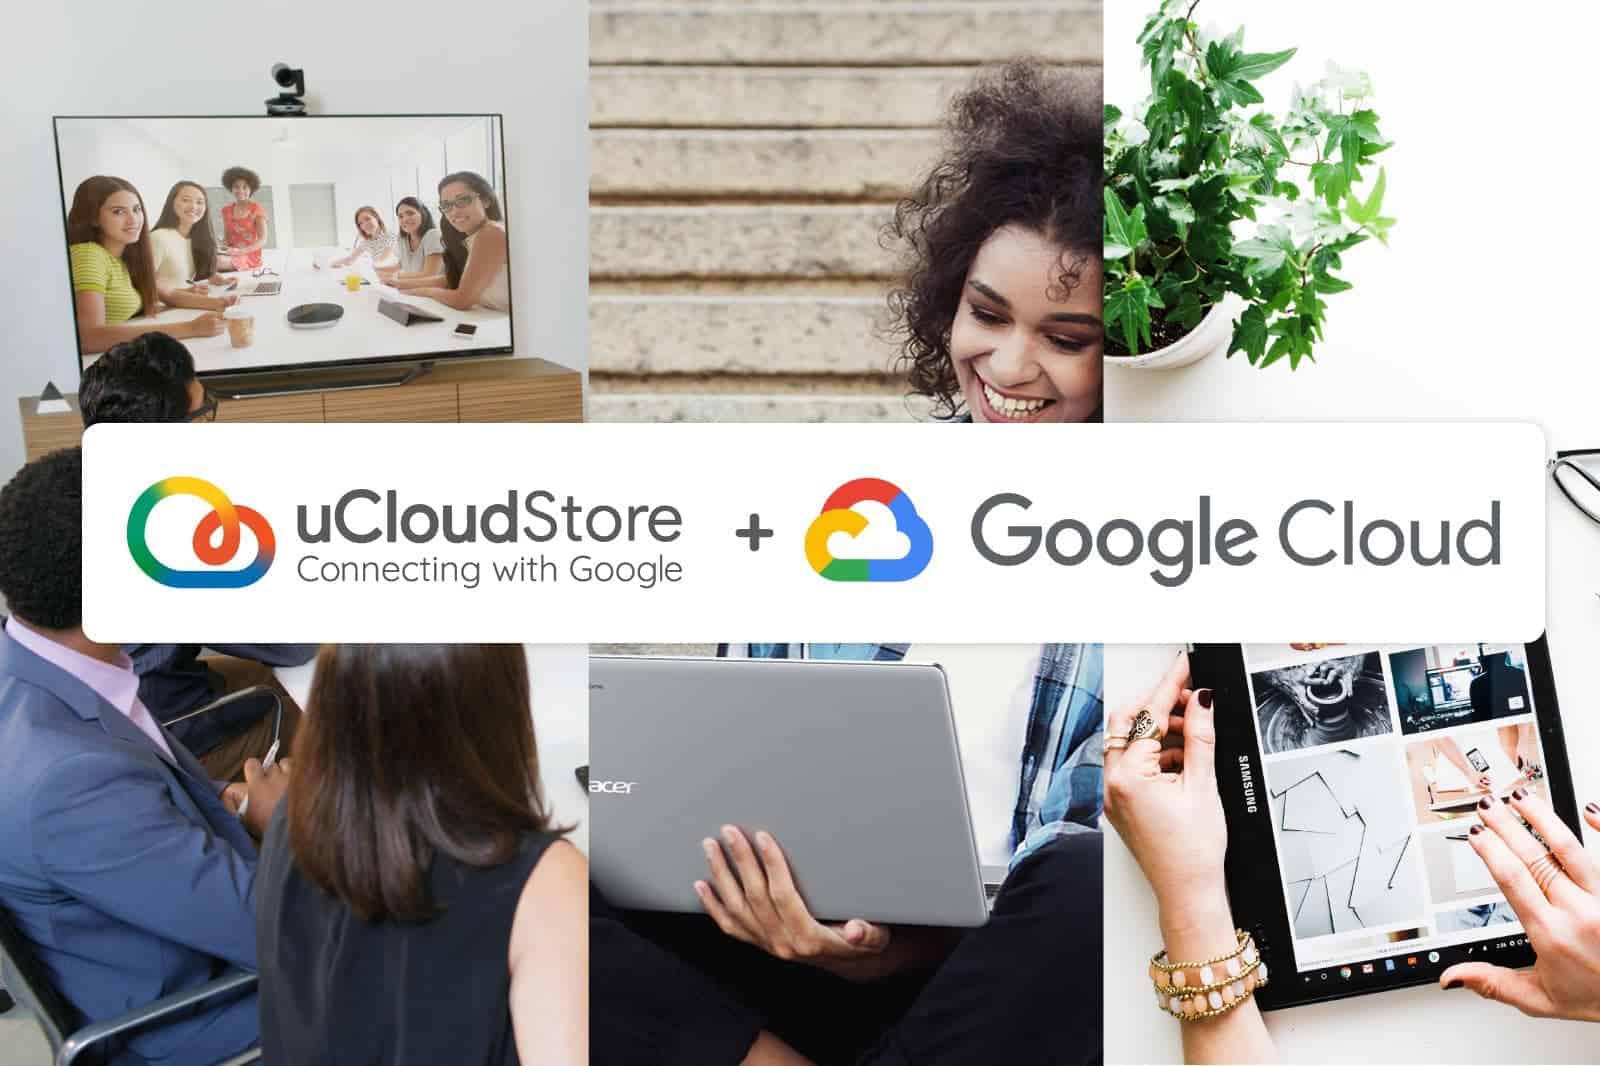 chrome-ucloudstore-04